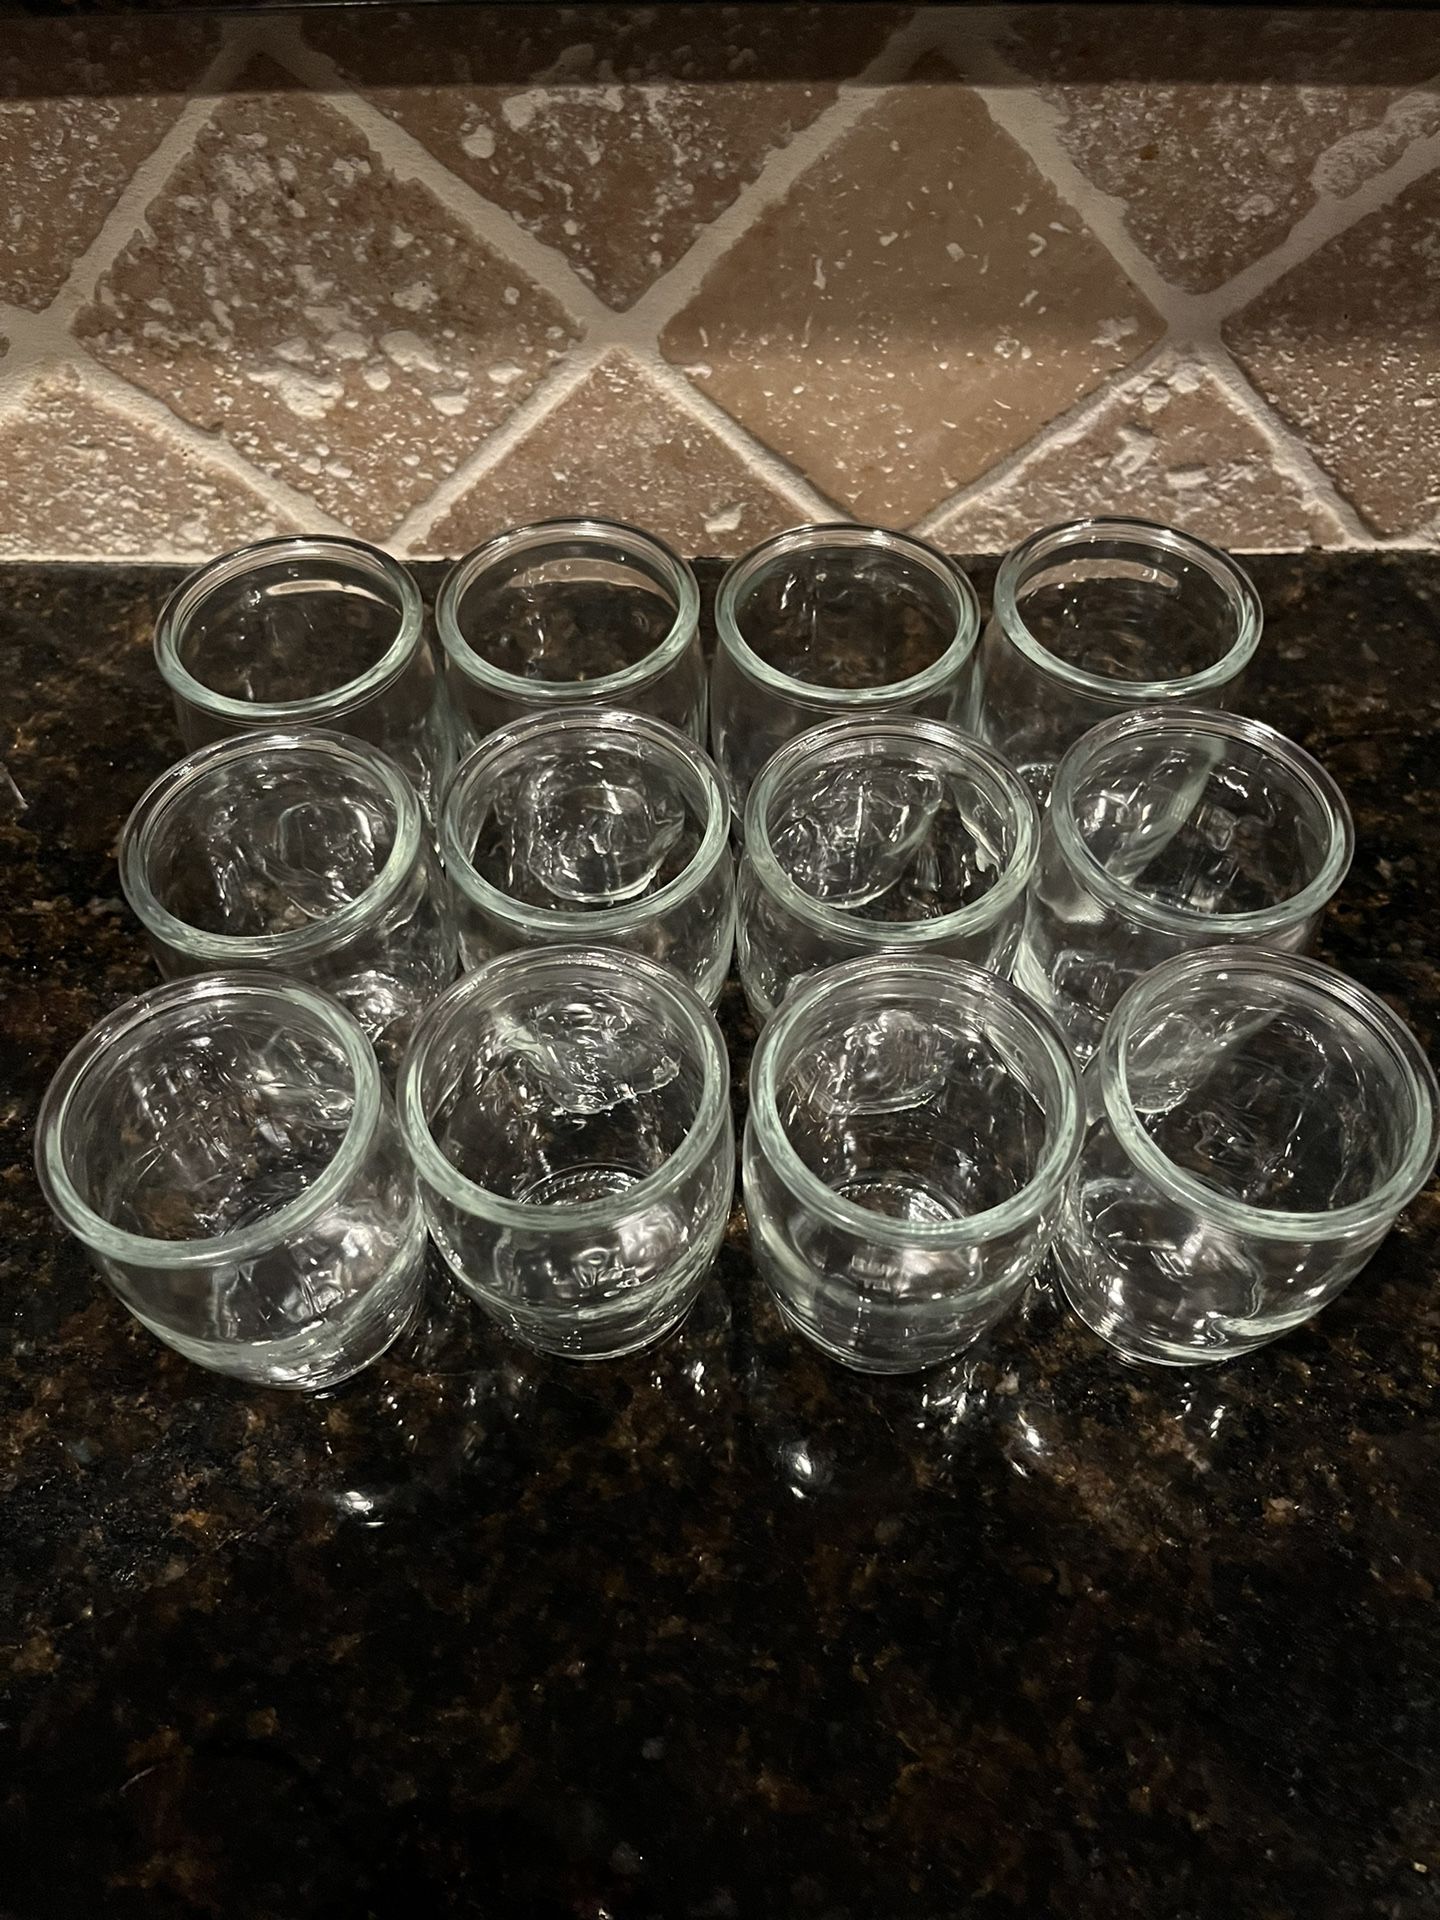 (12) 3”x2” Small Glass Glasses/Cups